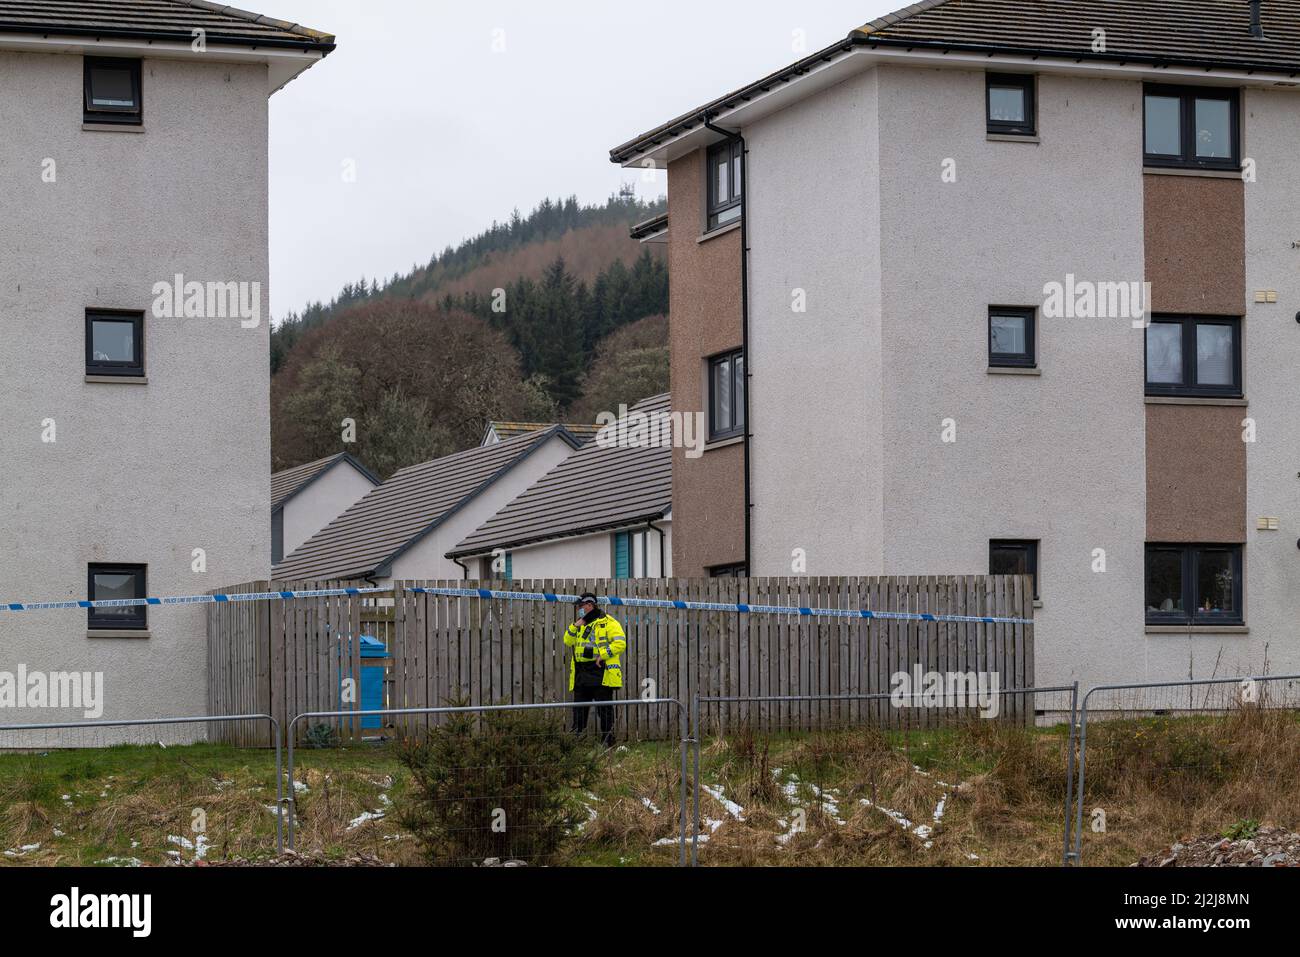 Polvanie View, Inverness, Highlands, Scotland. 1 April 2022.  This is the scne of the following Police PR - Statement following incident on Polvanie View in Inverness Officers attended at a property on Polvanie View in Inverness around 3pm on Thursday, 31 March, 2022, following a report of concern for a person. On attendance, the property was on fire. No-one was injured as a result of the fire and it was extinguished by the Scottish Fire and Rescue Service and a number of neighbouring residents have had to be evacuated. During the incident a 40-year-old man was shot by the police. Credit: JASP Stock Photo